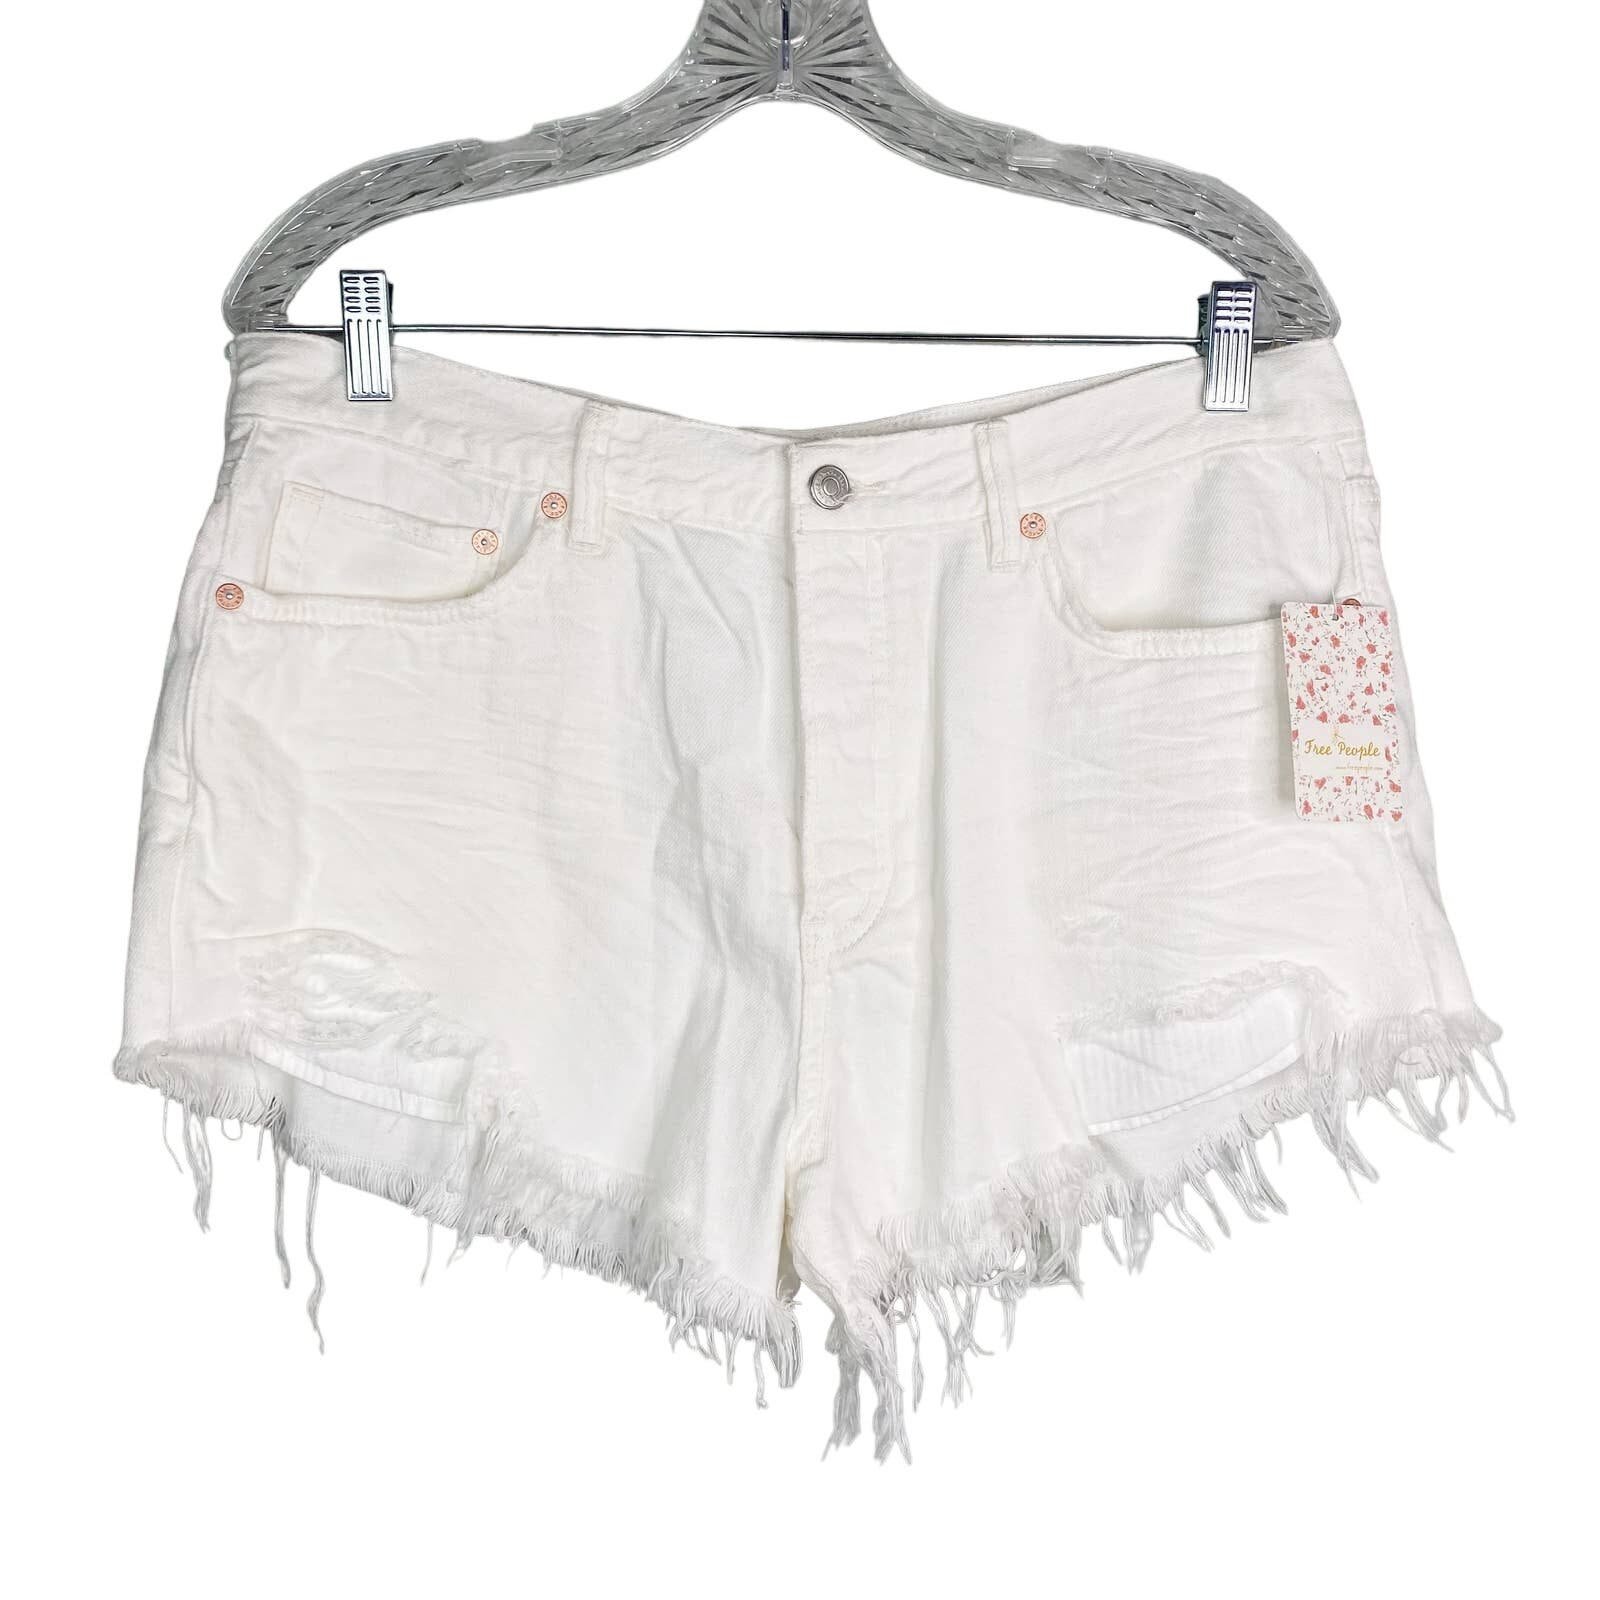 Special offer  Free People We The Free Loving Good Vibrations Cutoffs 31 Spring White New O48yZbkBT all for you